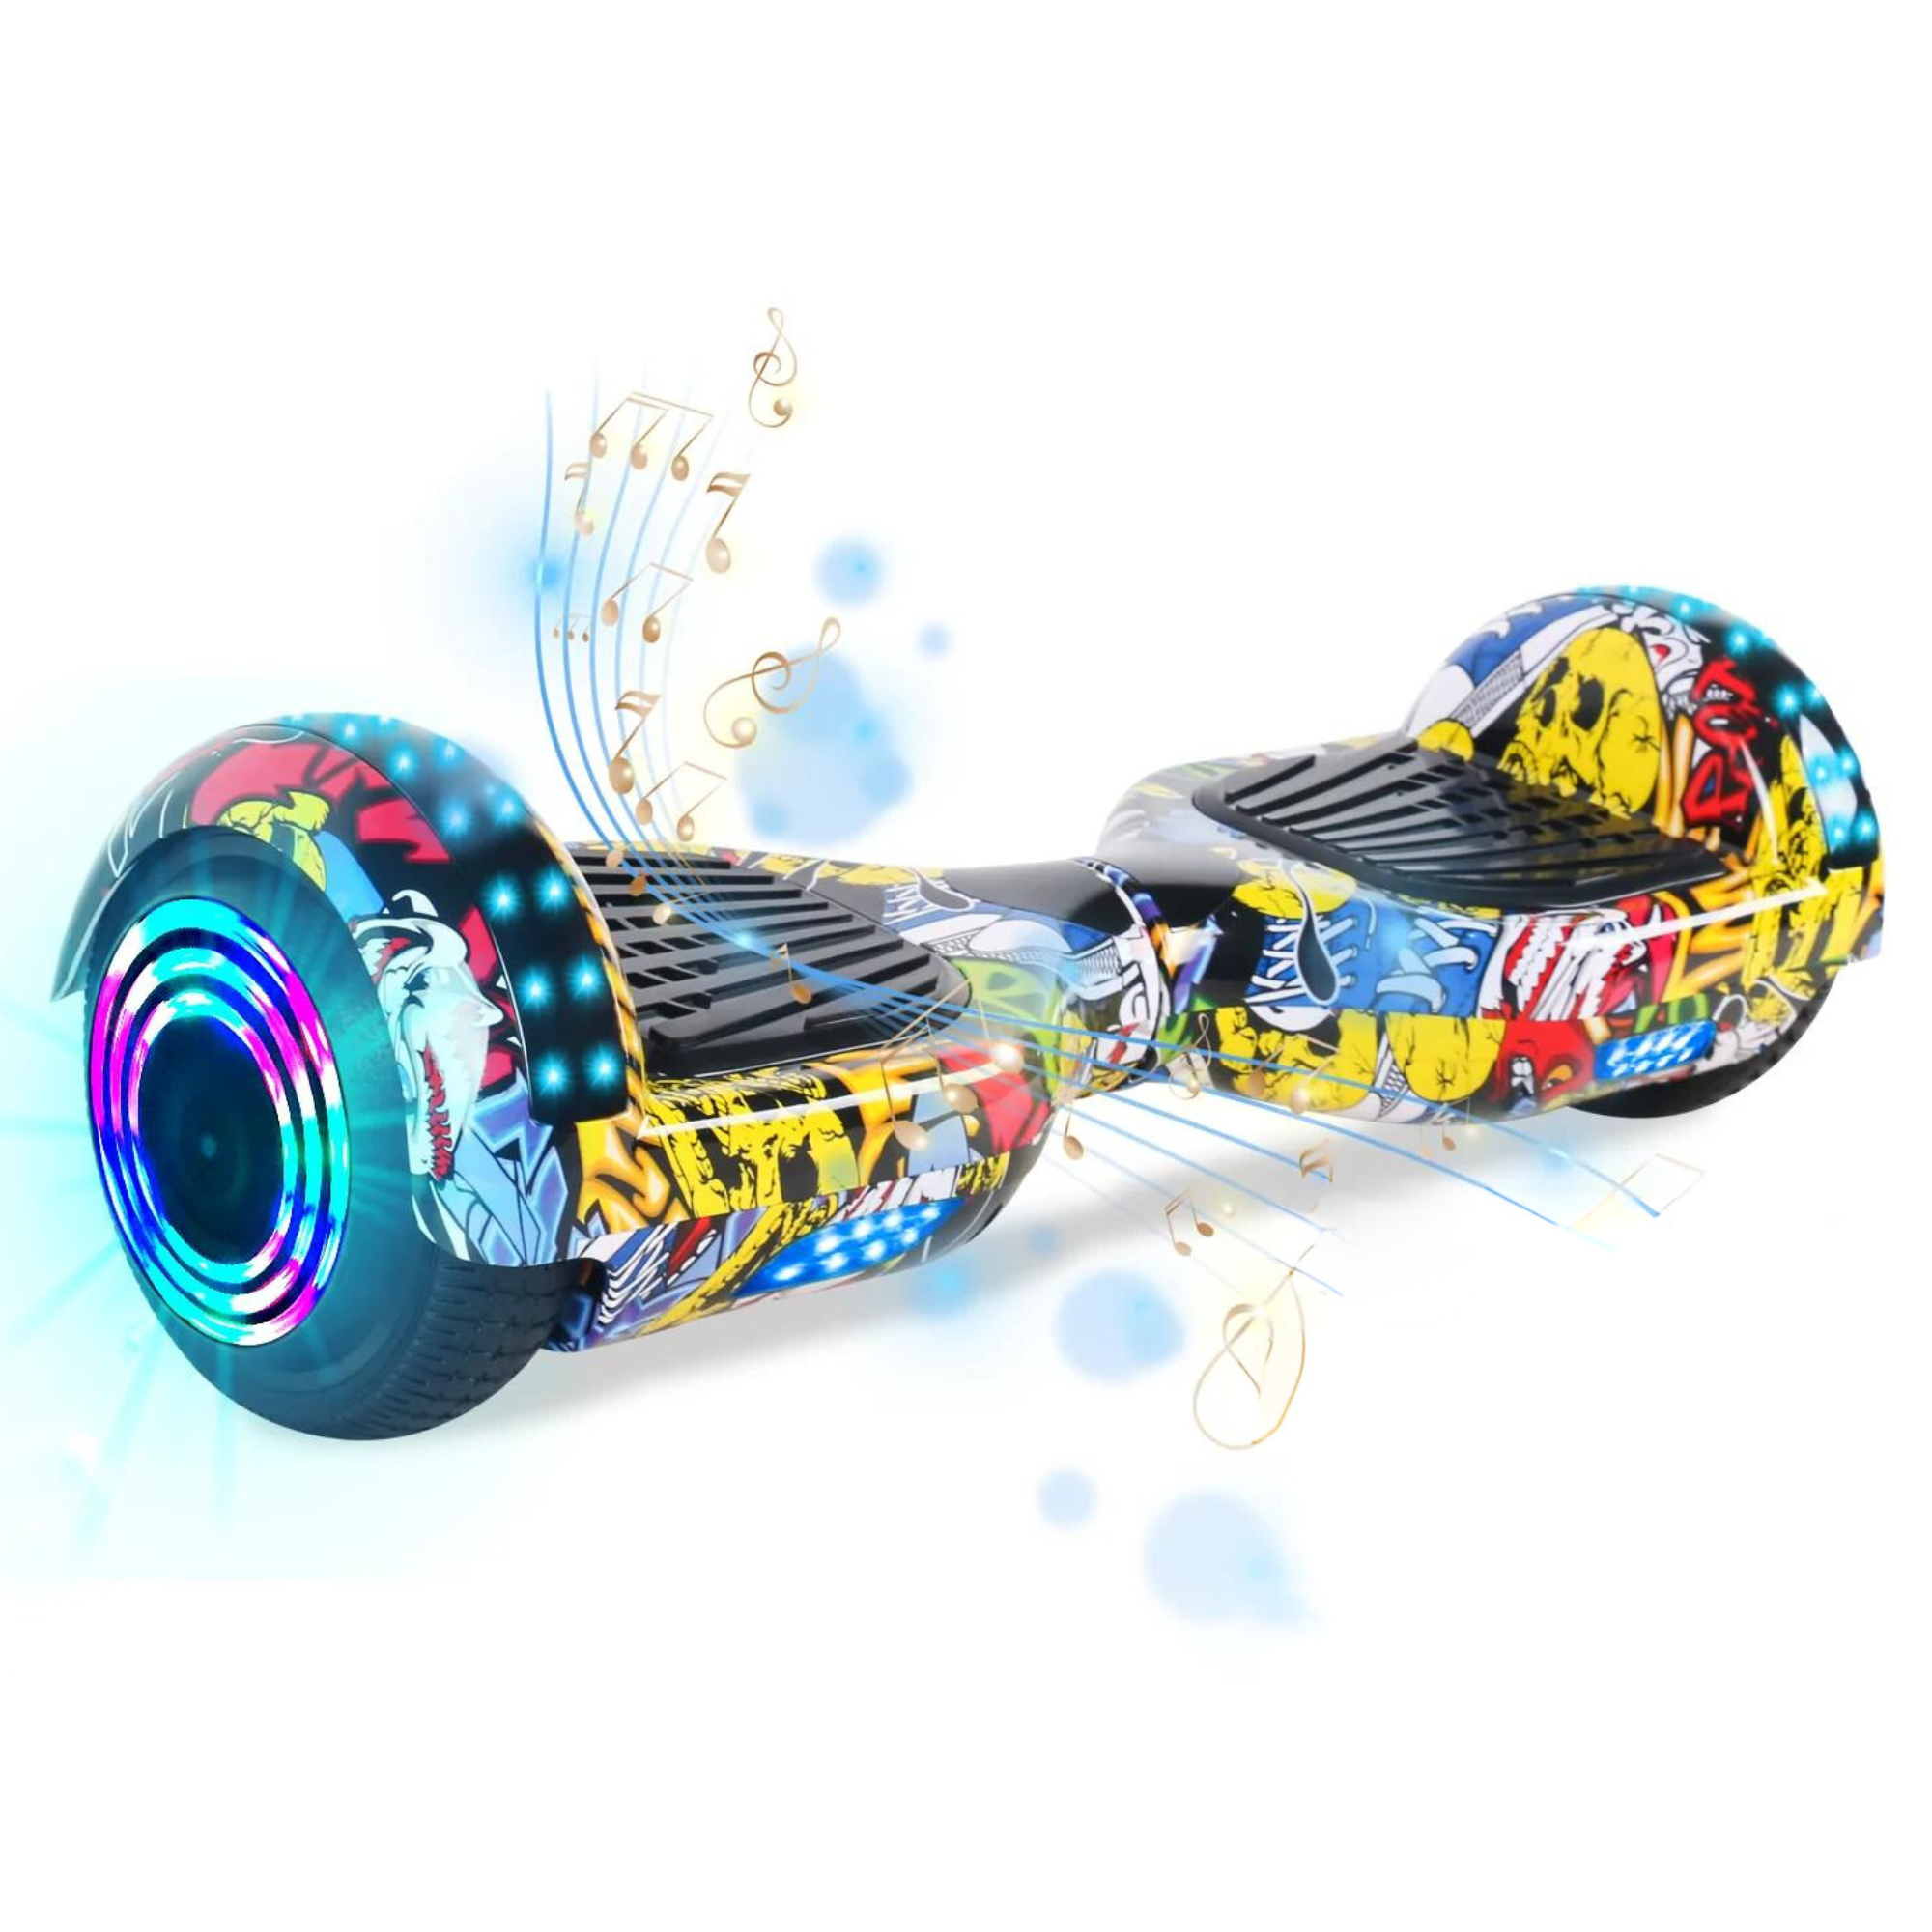 Graffiti Yellow N1 Windgoo Hoverboard | From Hoverboard Store